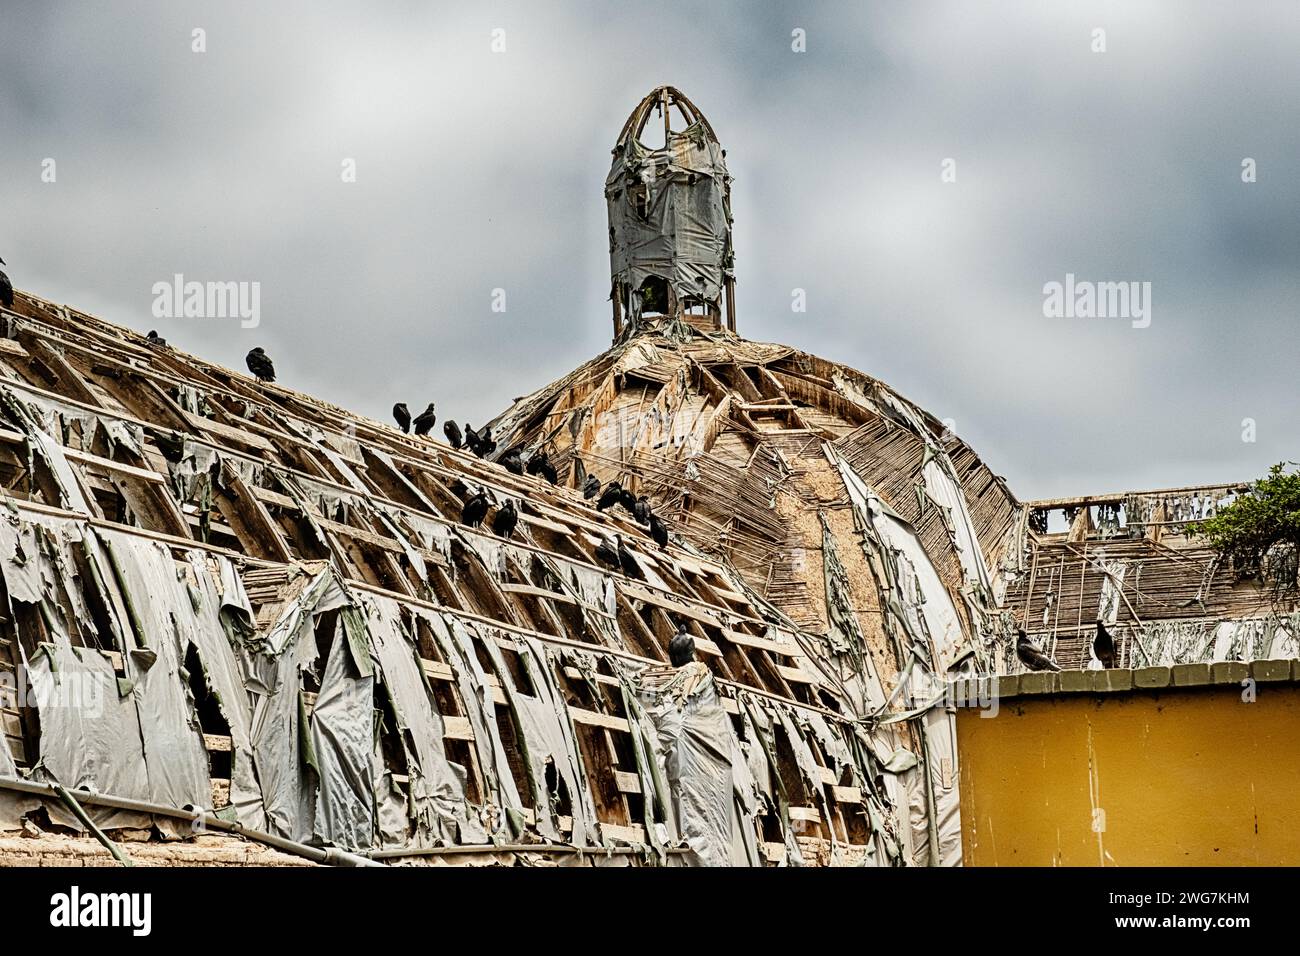 An old church roof in the Barranco district of Lima is damaged almost beyond repair and has resulted in an urban ruin. Stock Photo